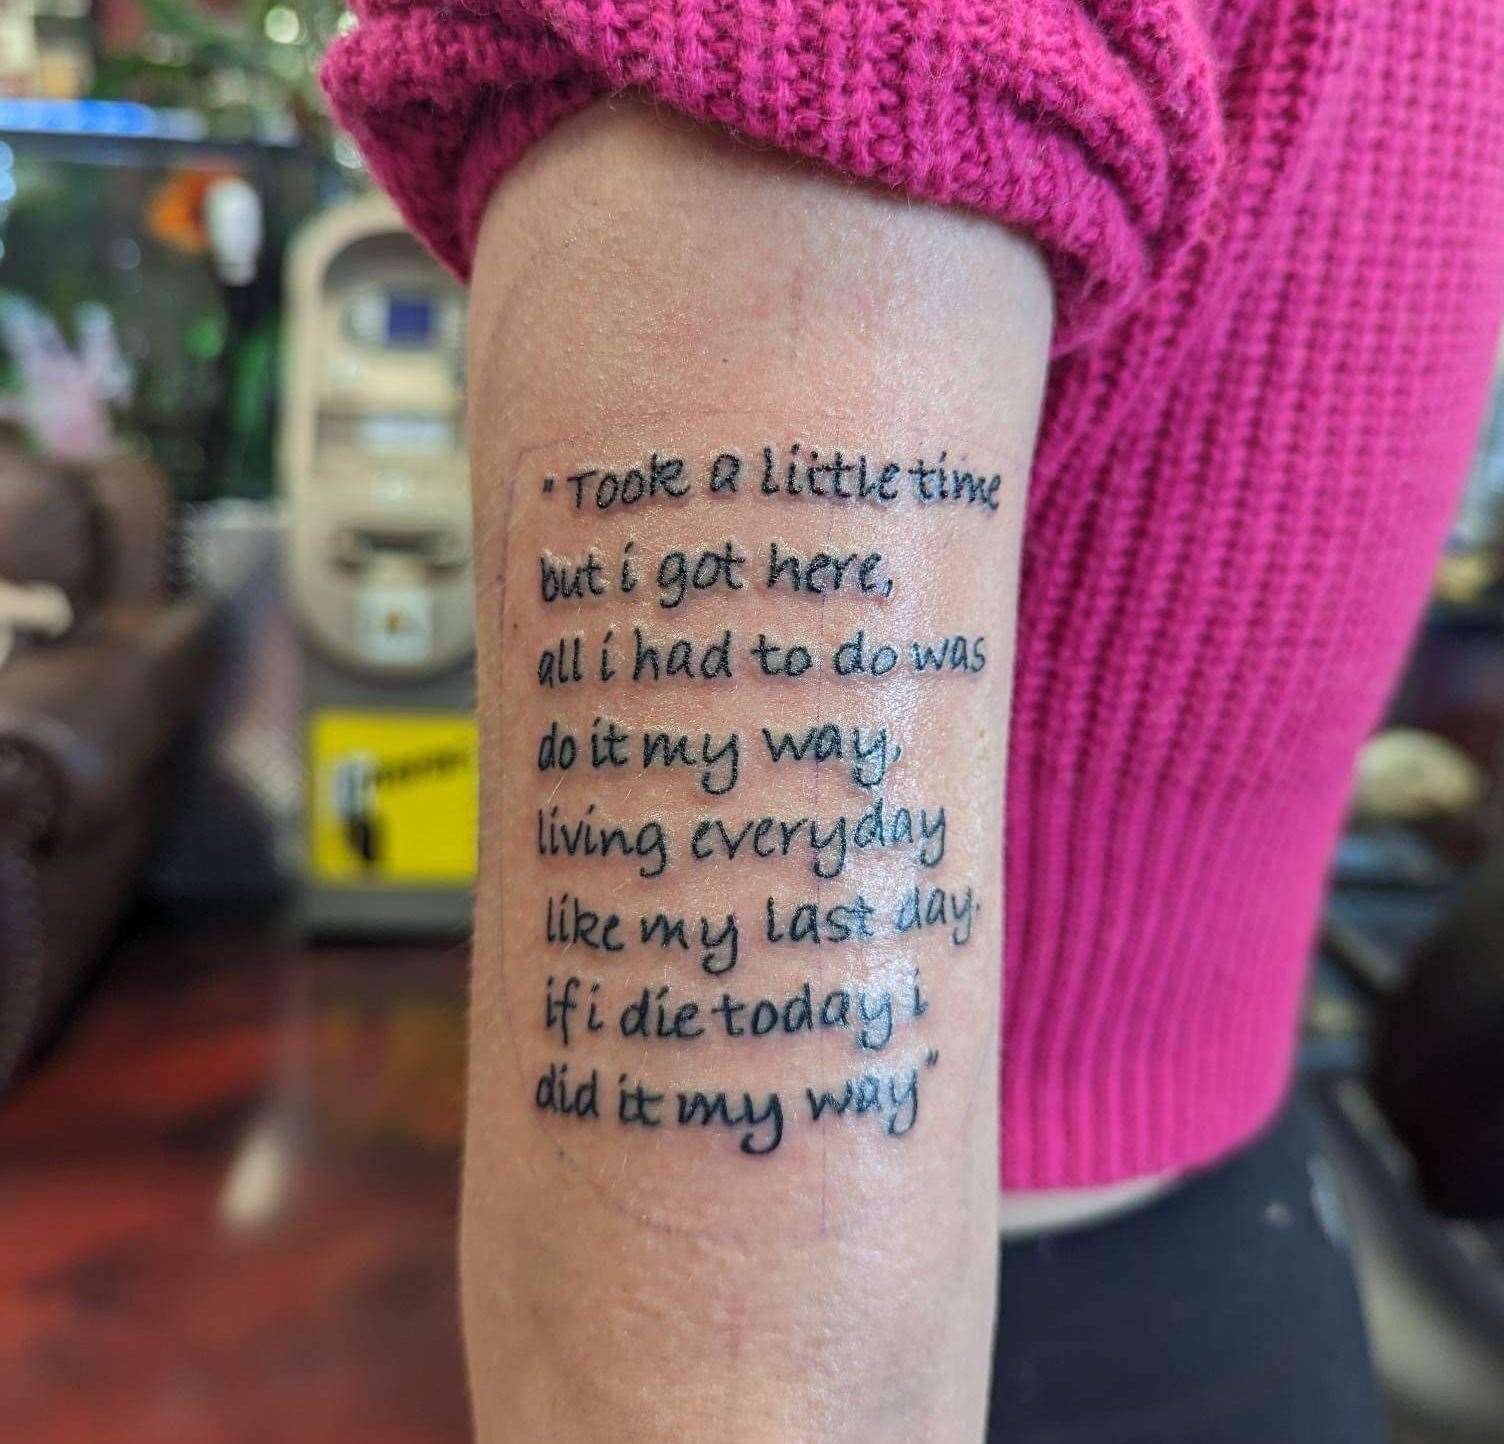 The woman who lives almost 4,000 miles away got the lyrics tattooed on her arm